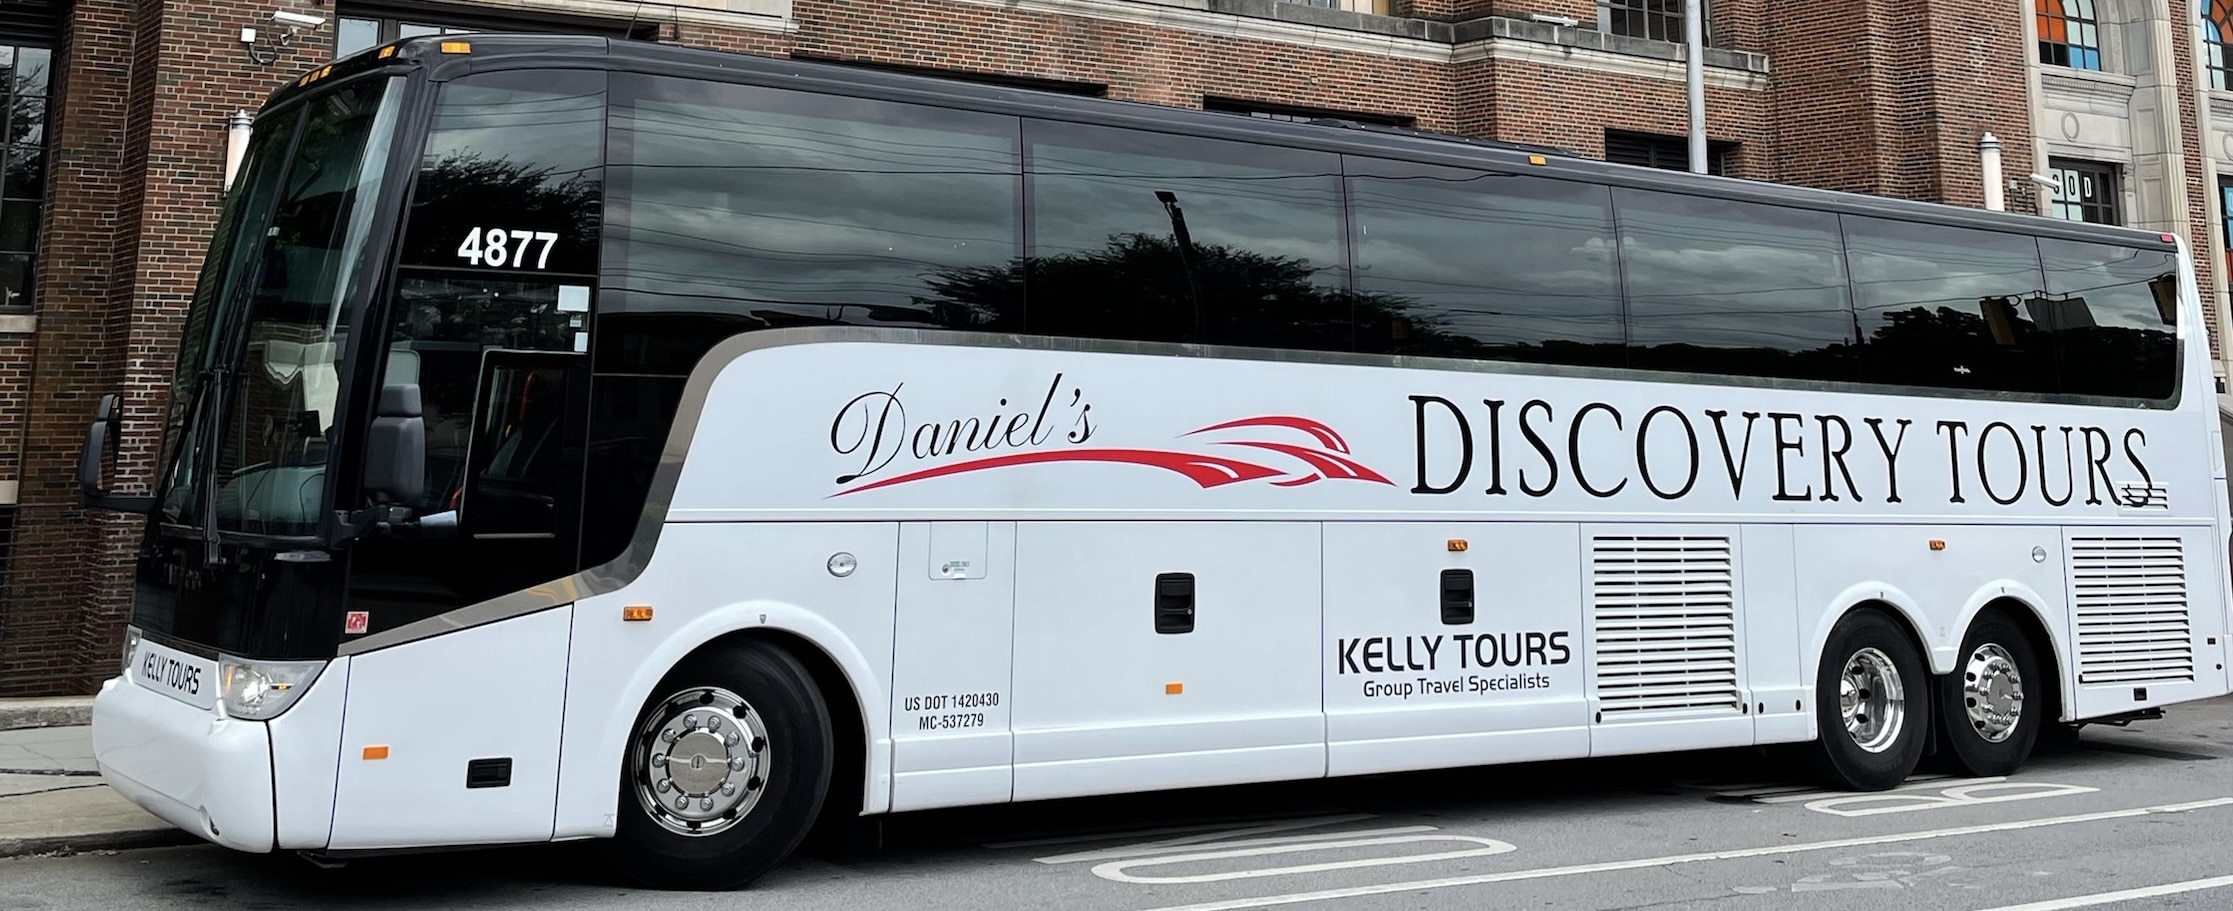 Scheduled Tours - Daniel's Discovery Tours